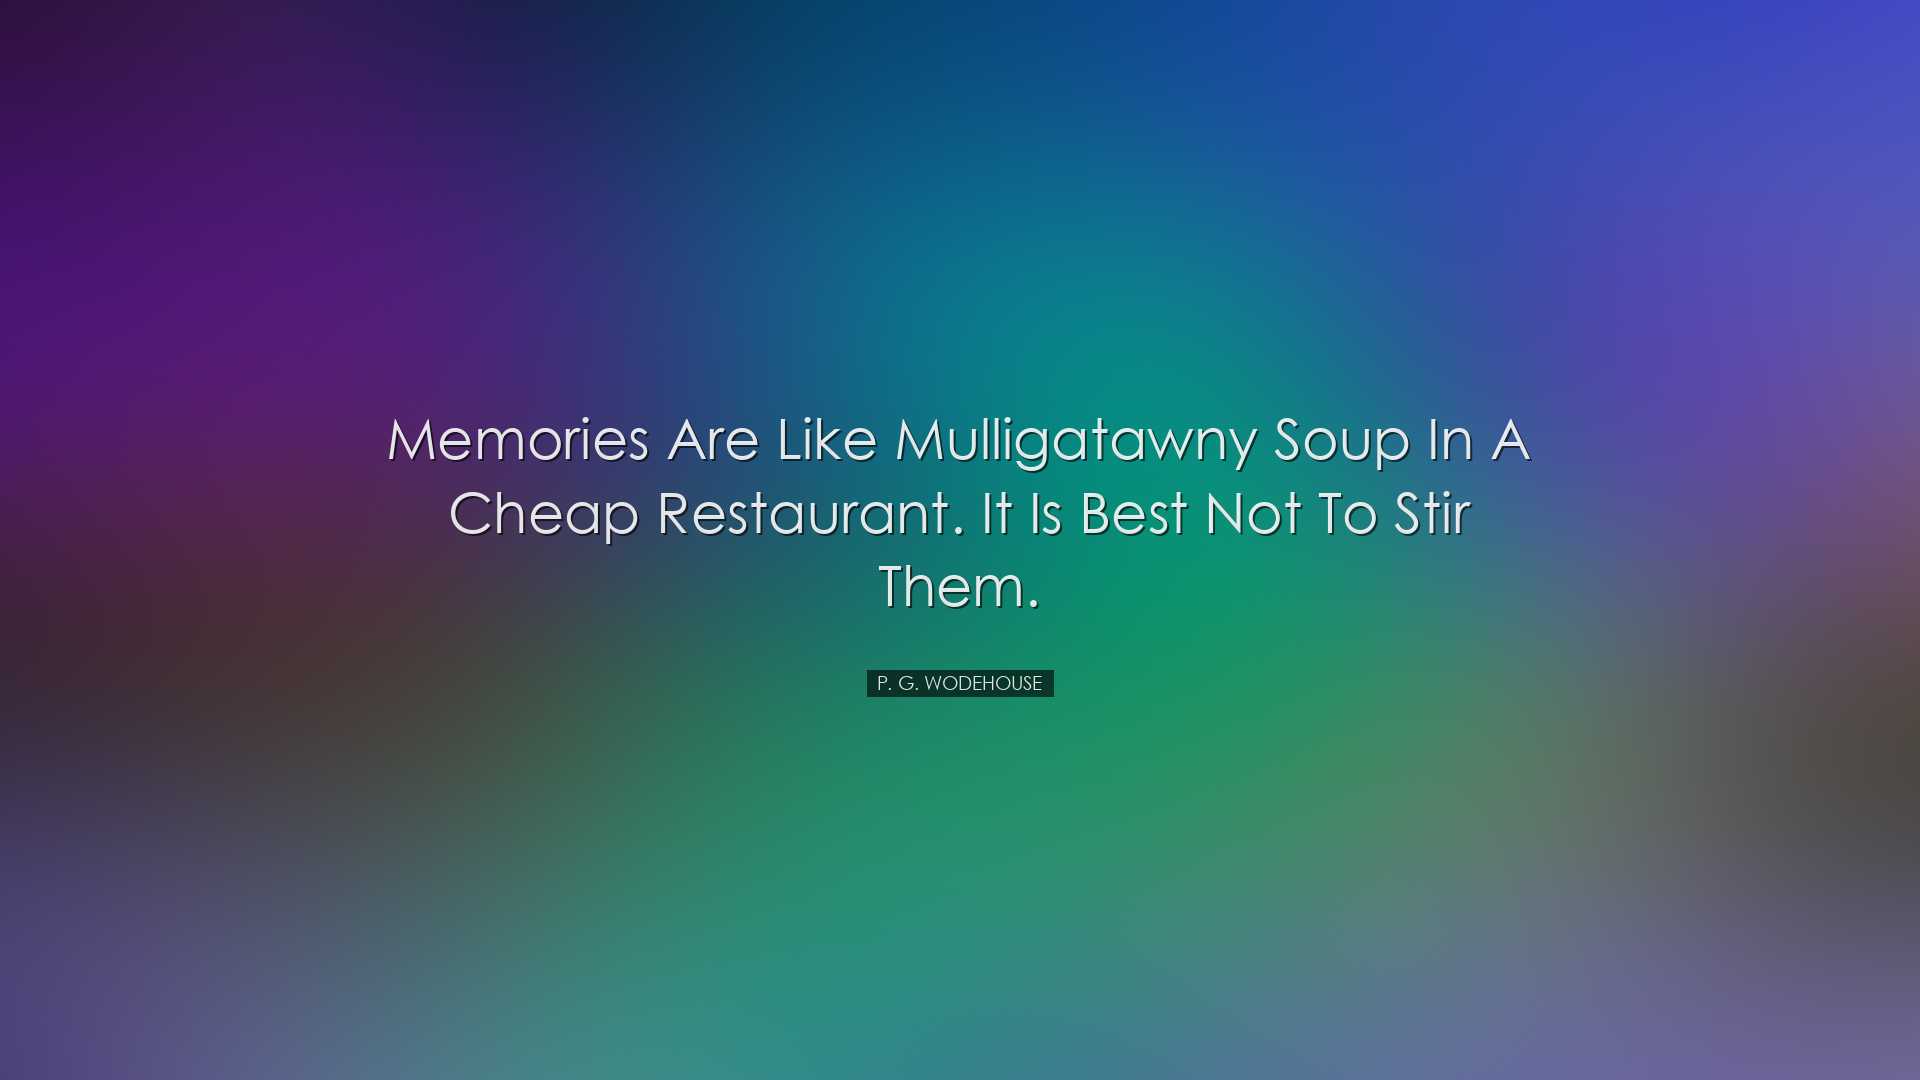 Memories are like mulligatawny soup in a cheap restaurant. It is b